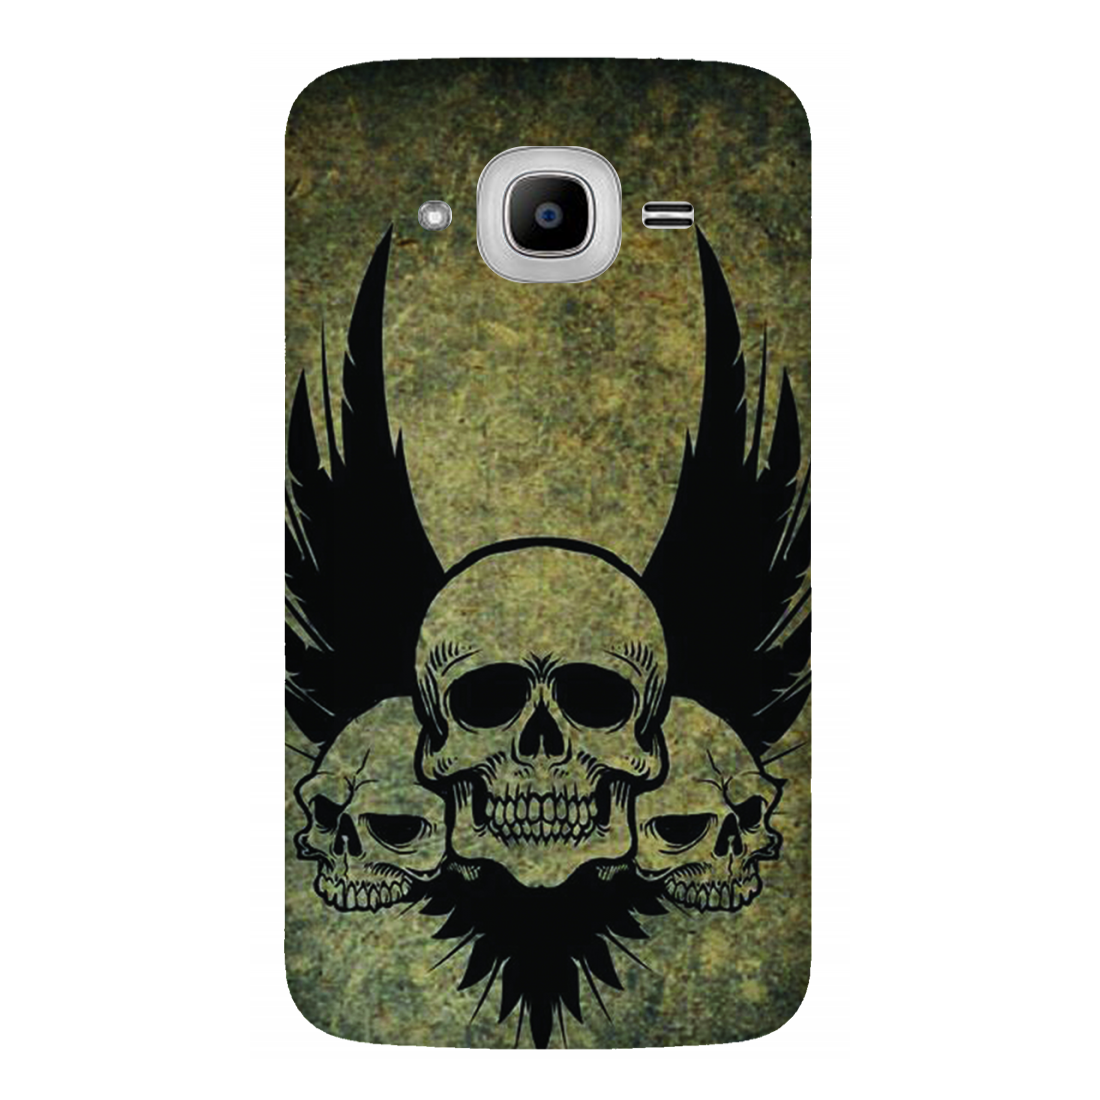 Menacing Skulls with Dark Wings on a Grungy Background Case Samsung Galaxy J2Pro (2016)